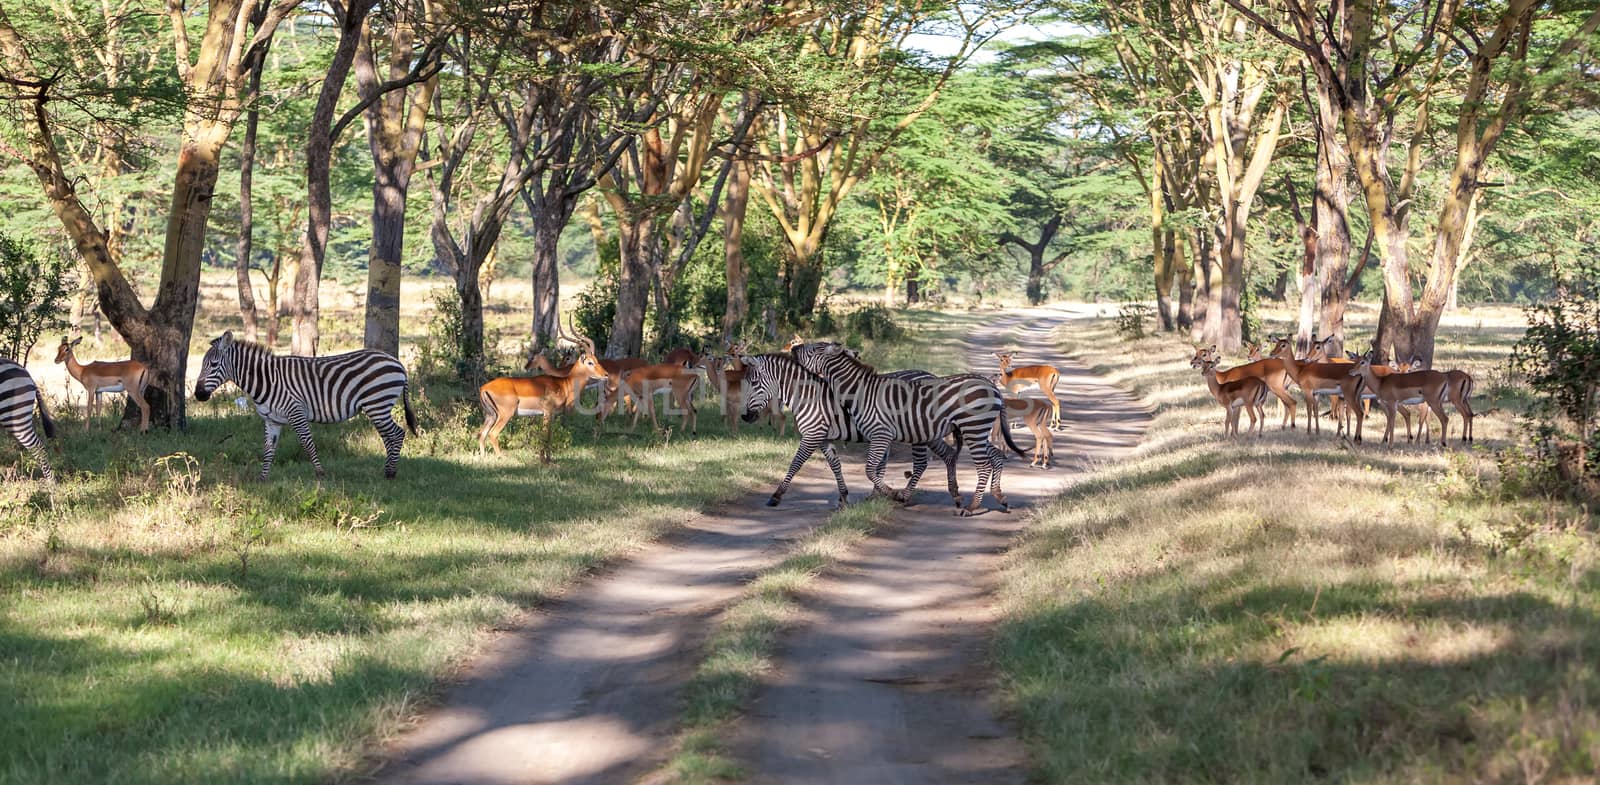 antelopes and zebras on a background of road. Safari in Africa